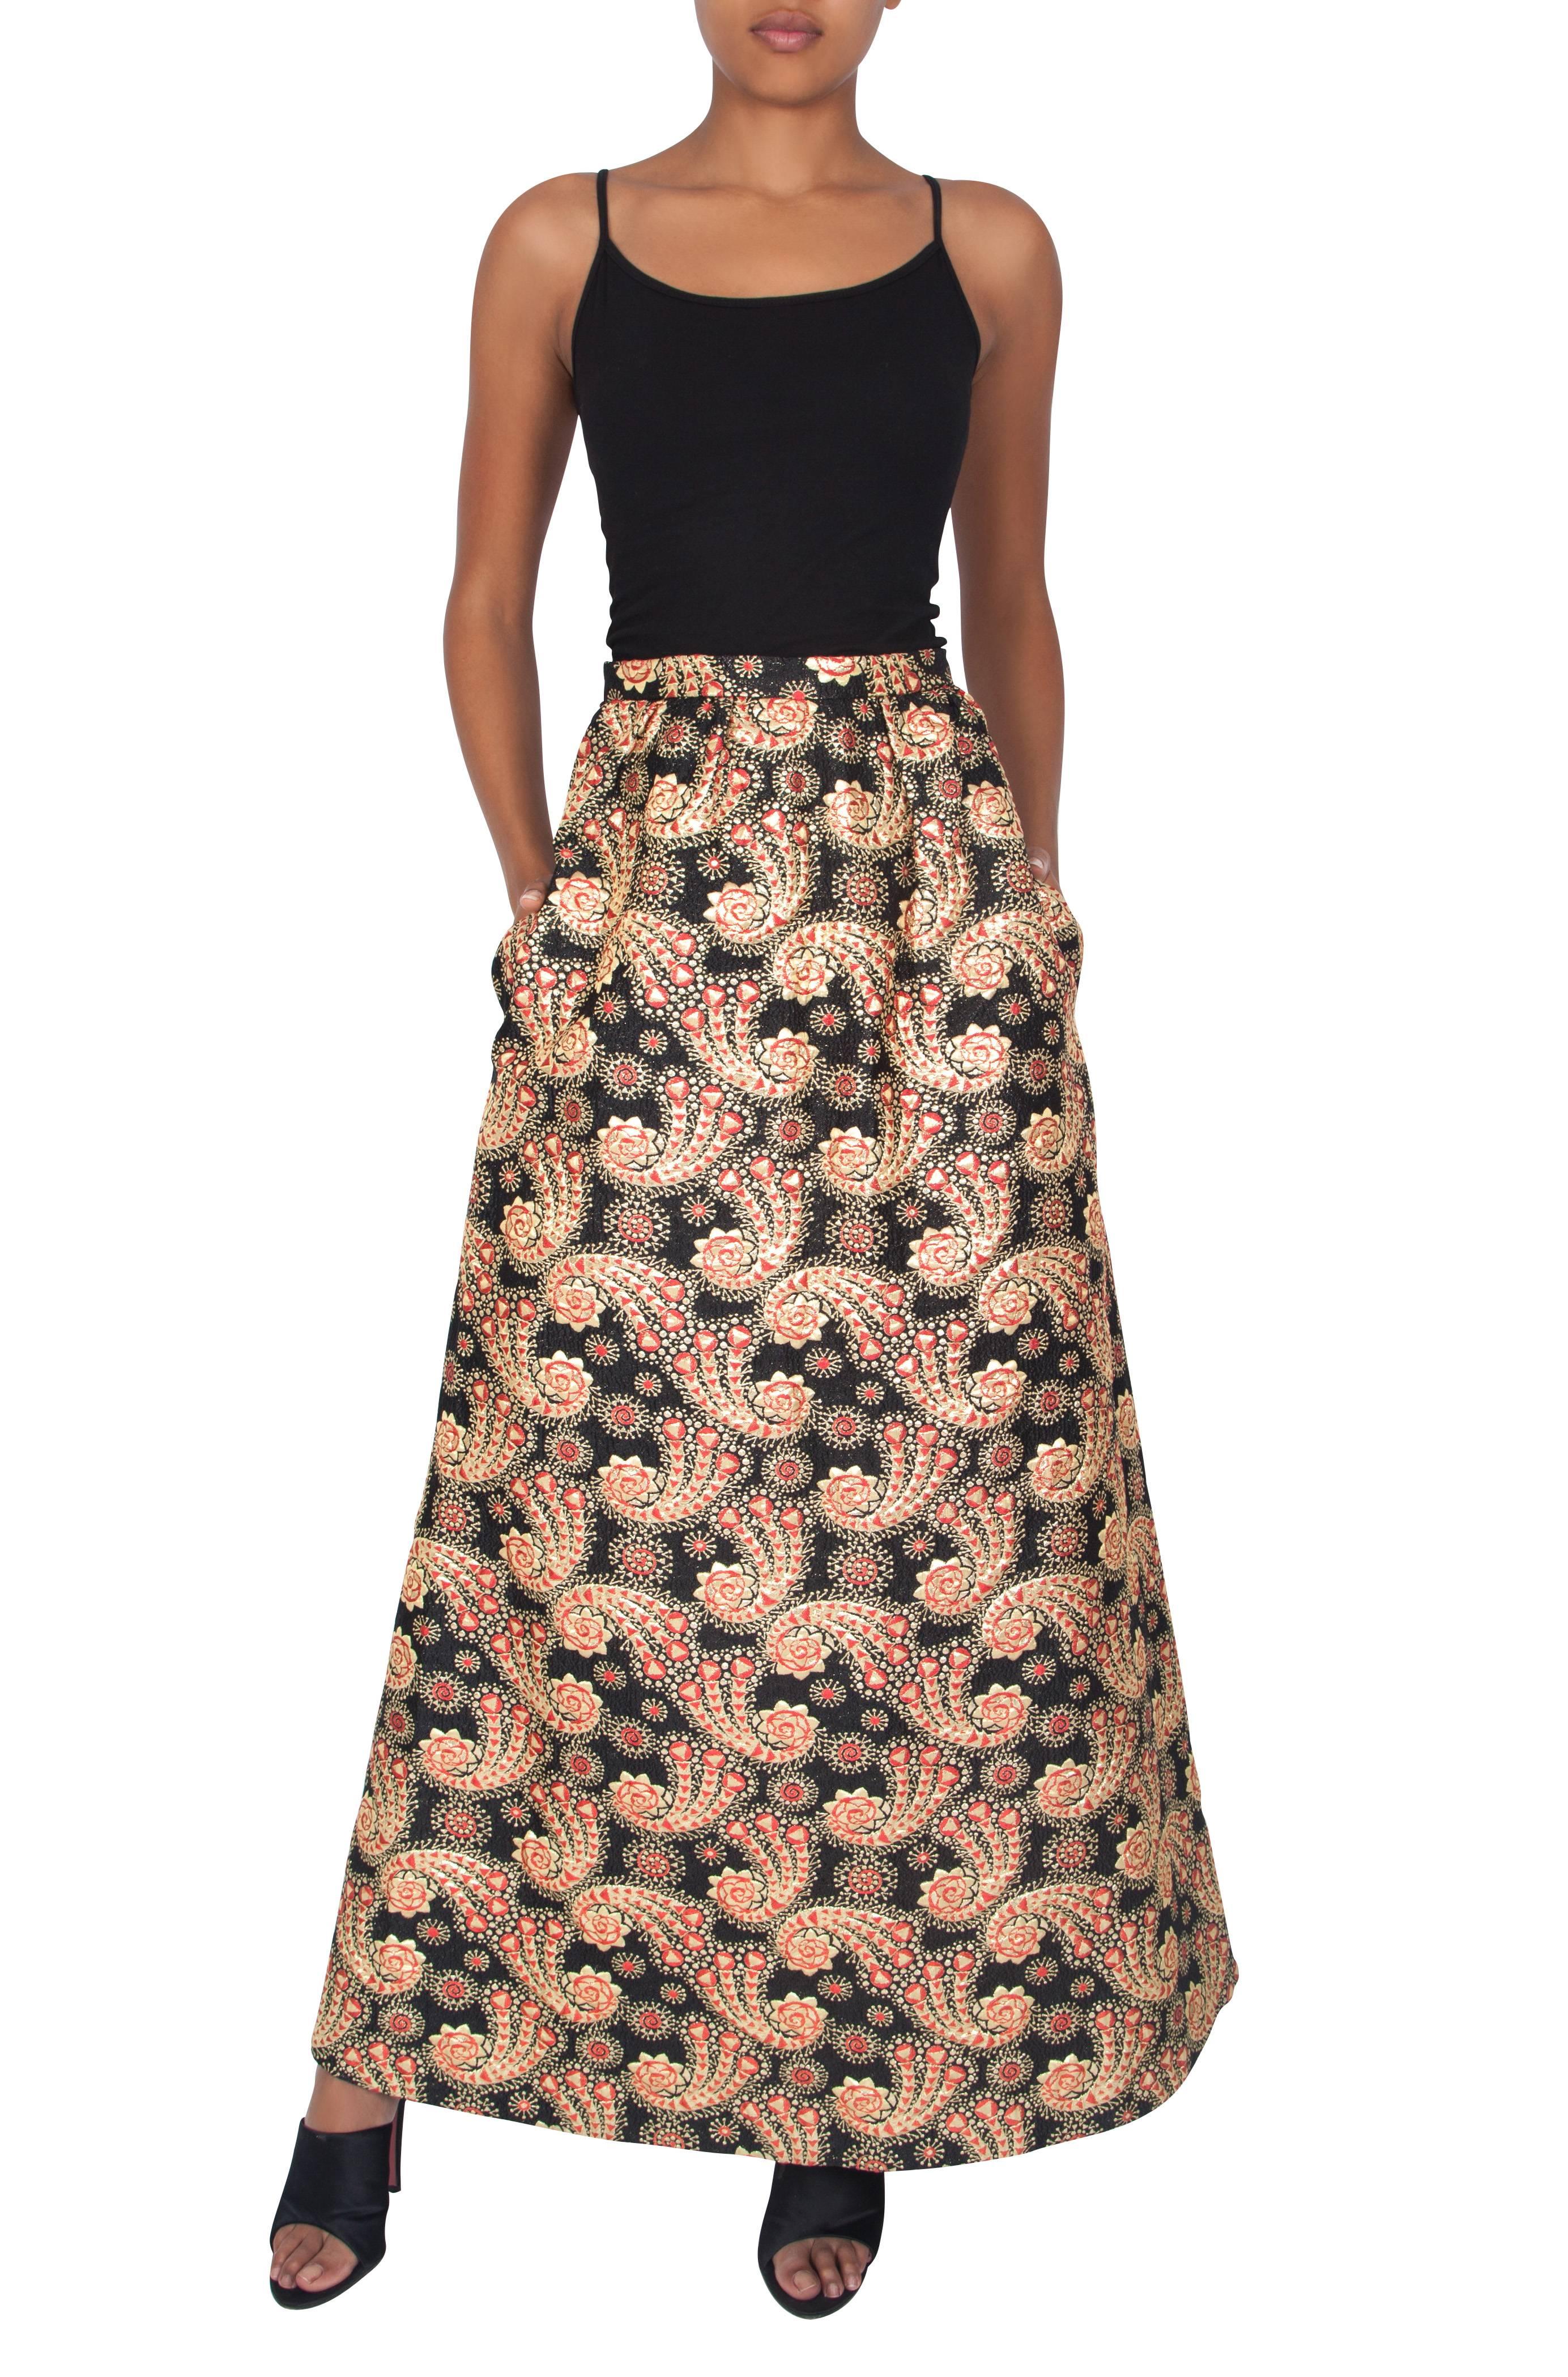 We love this beautiful Hardy Amies piece from the 1960's. It is an amazing skirt for a special occasion with its intricate brocade fabric forming a paisley pattern in tones of shimmering gold, black and hot magenta. It also features pockets hidden